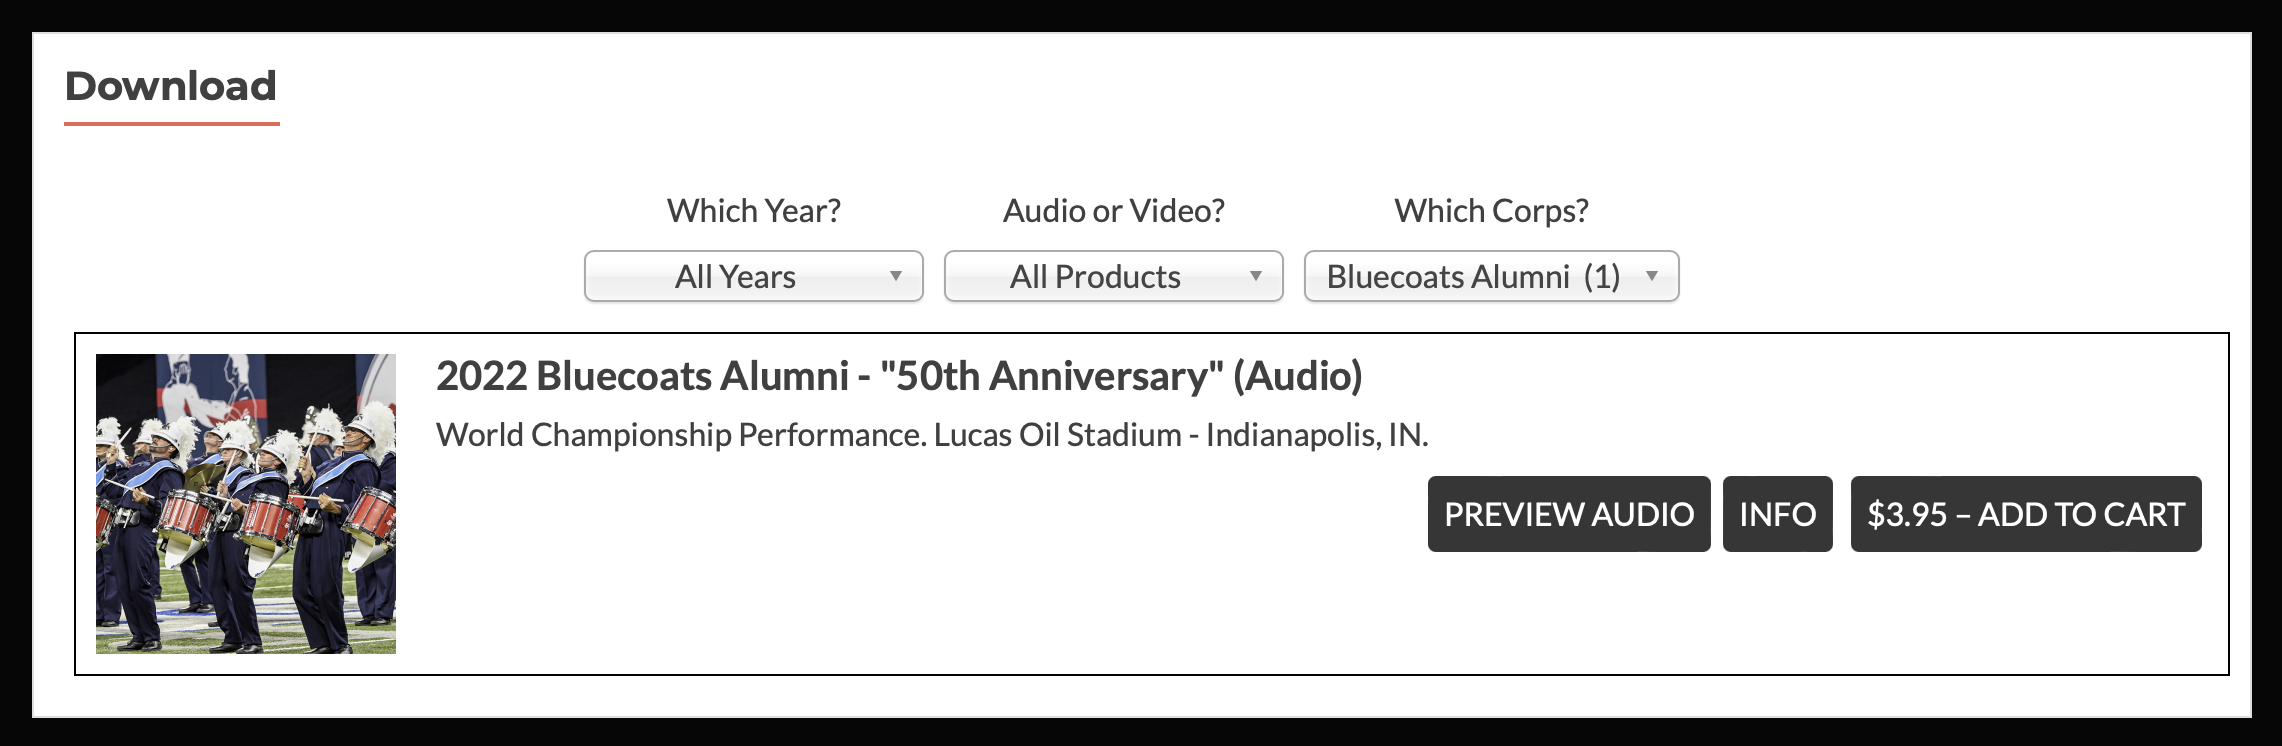 A screen shot of the audio performance download for the 2022 Bluecoats Alumni performance at DCI Semifinals last season.